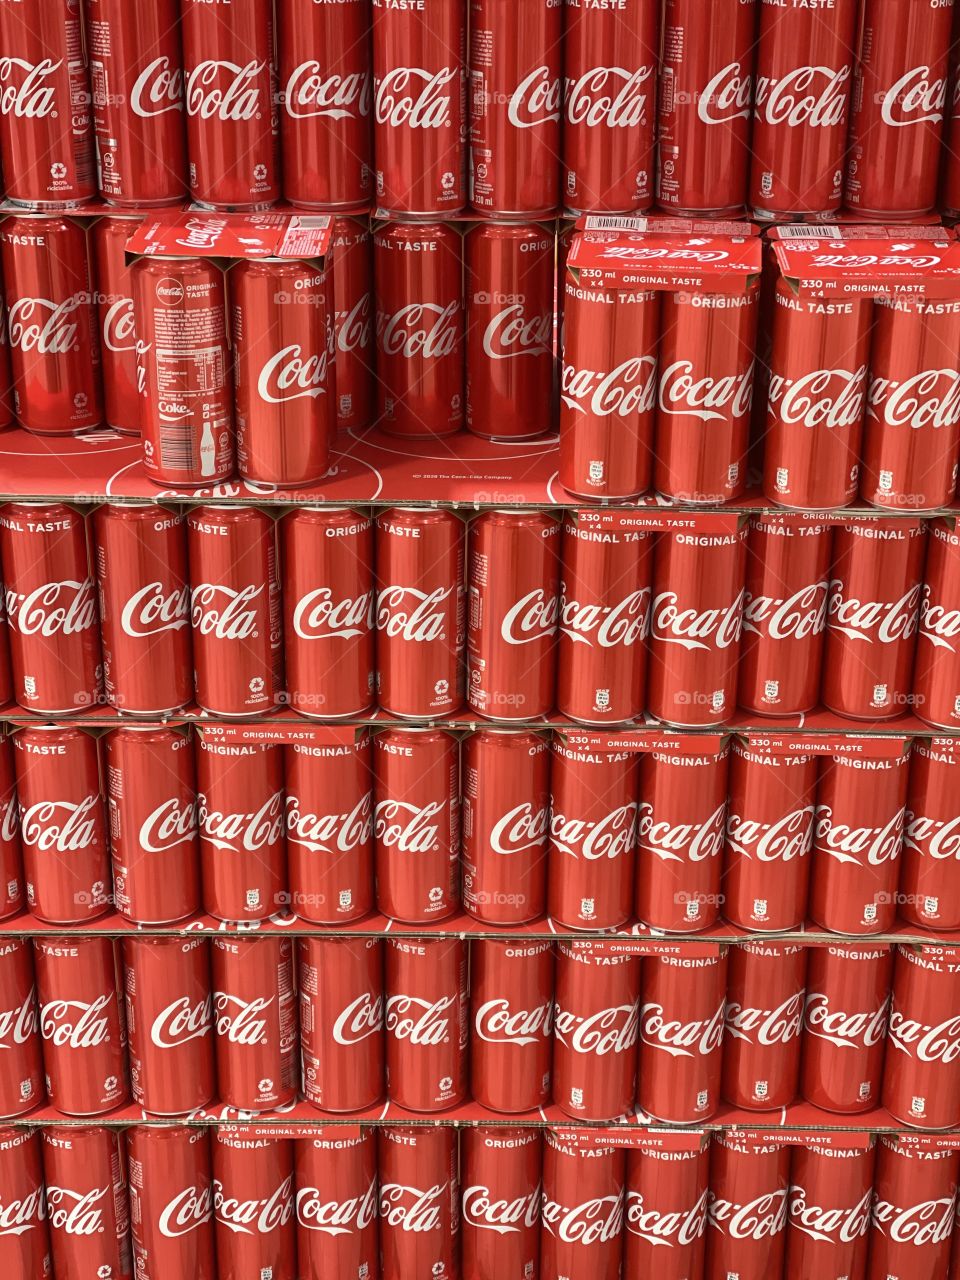 Coca Cola tin cans at the supermarket